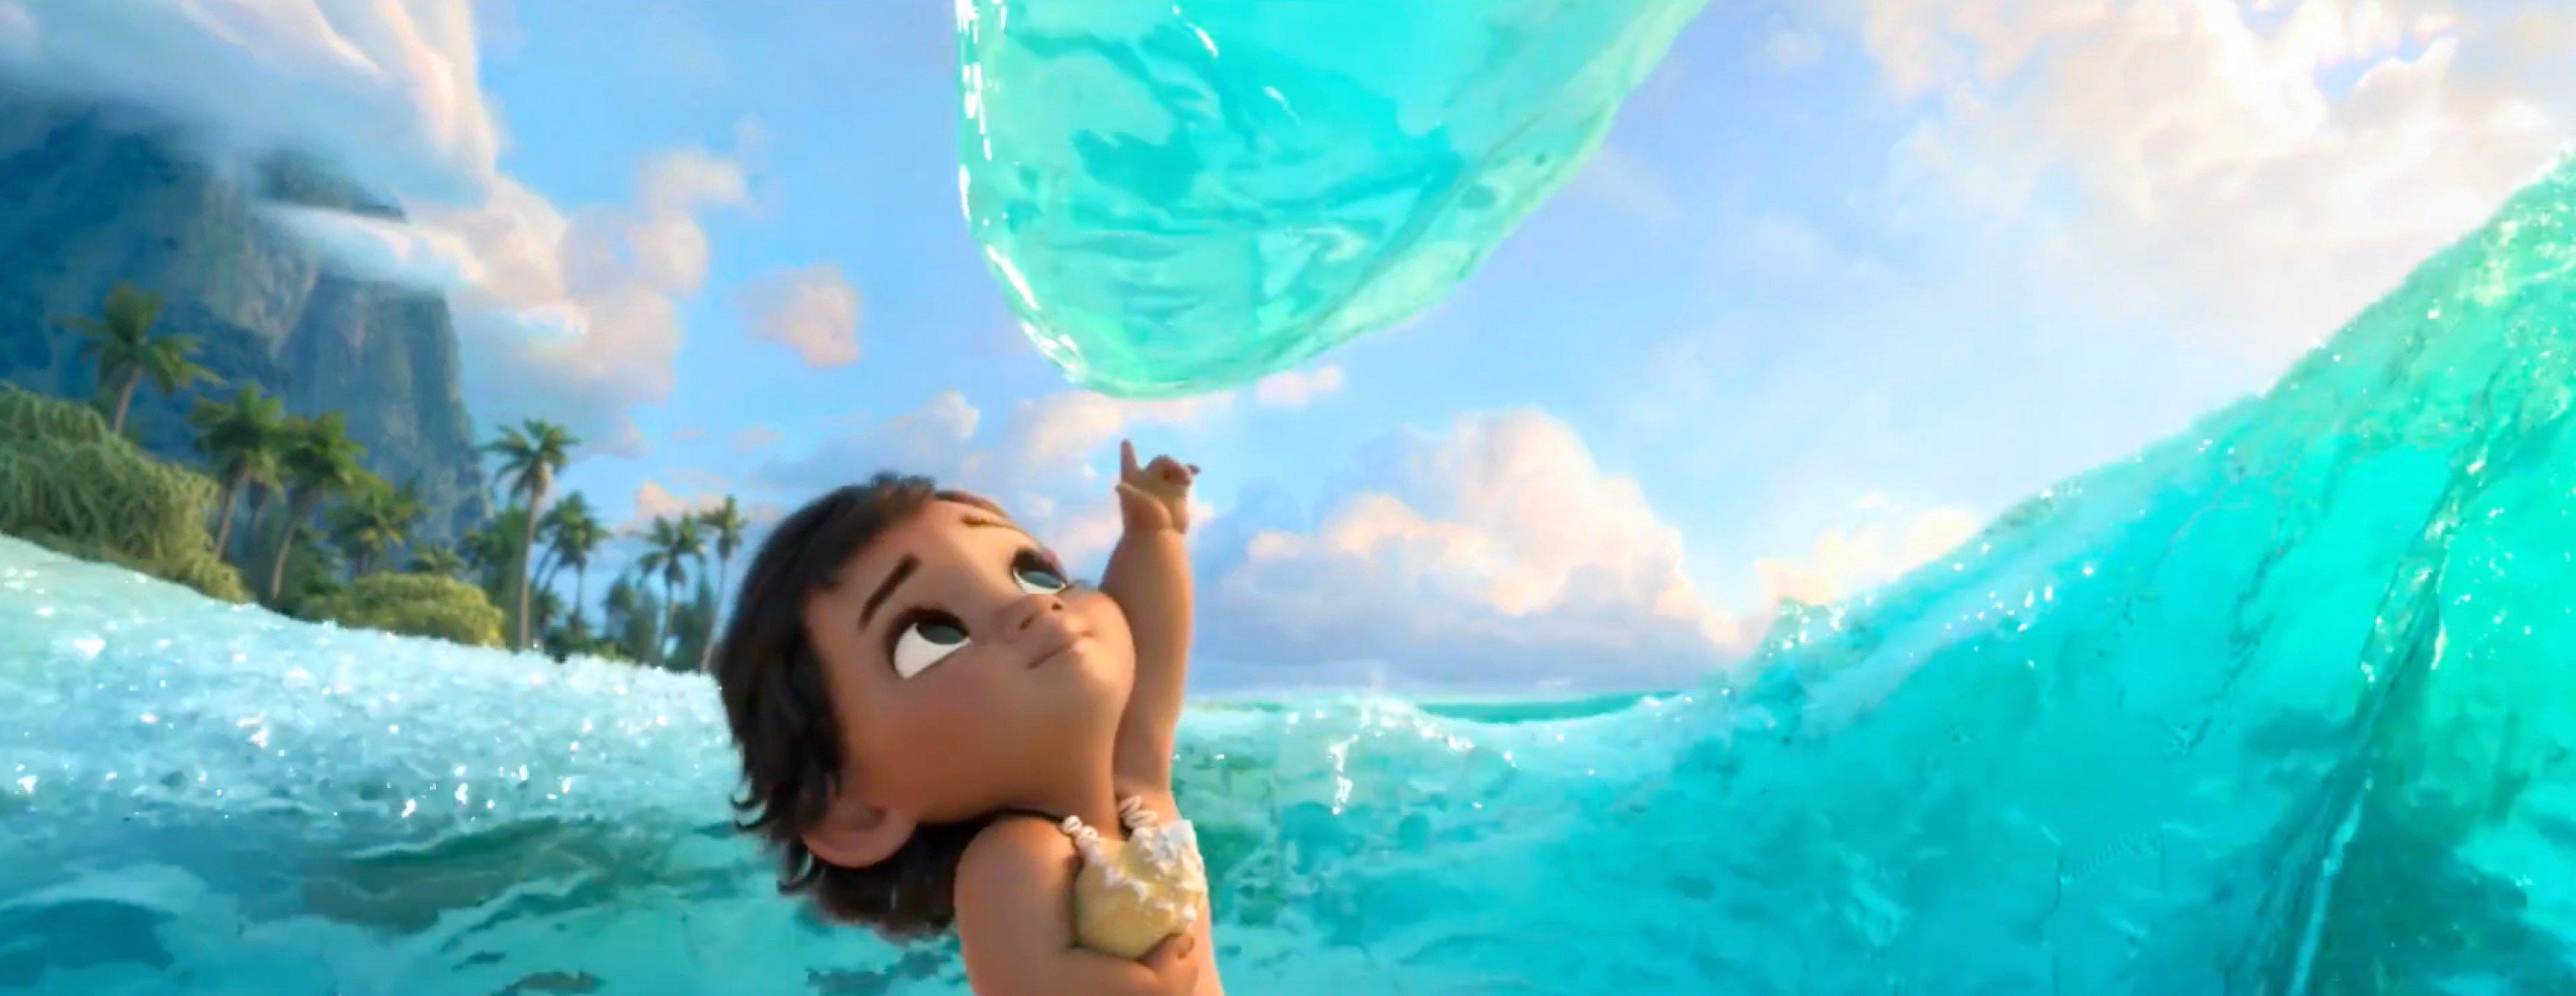 Moana review: after 80 years of experiments, Disney has made